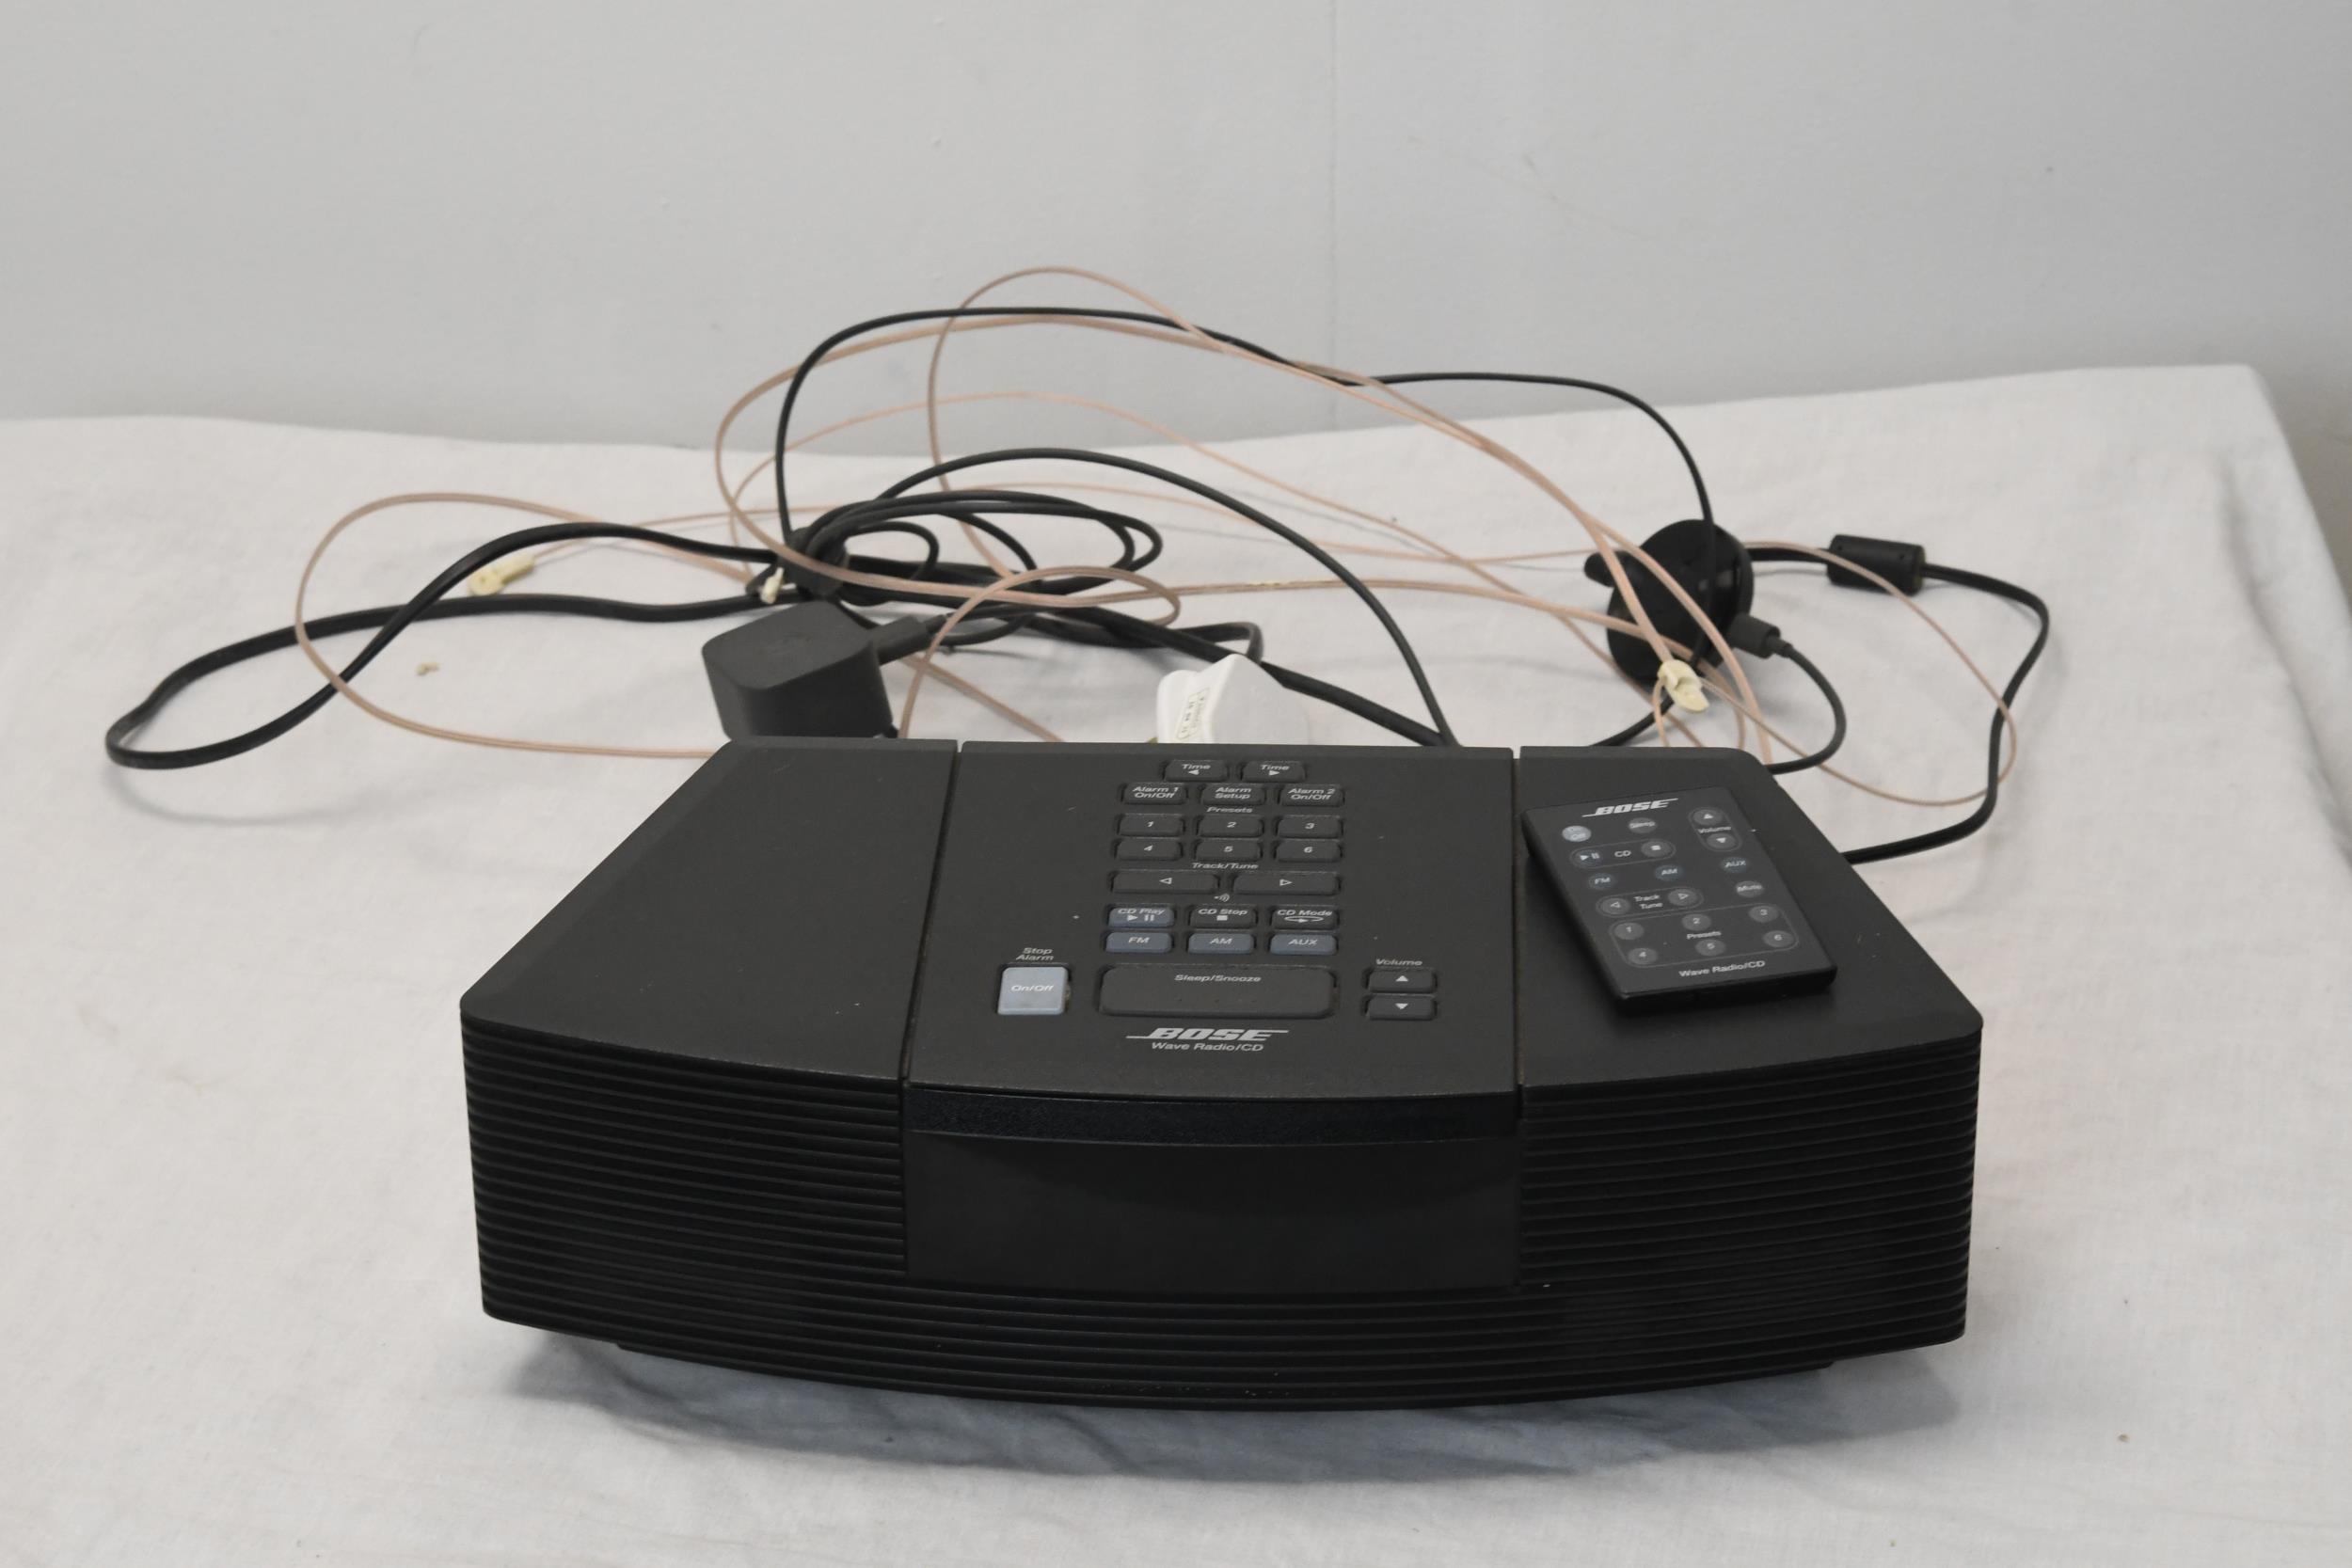 A Bose Radio AM/FM & CD audio interfacer with google home connectivity.